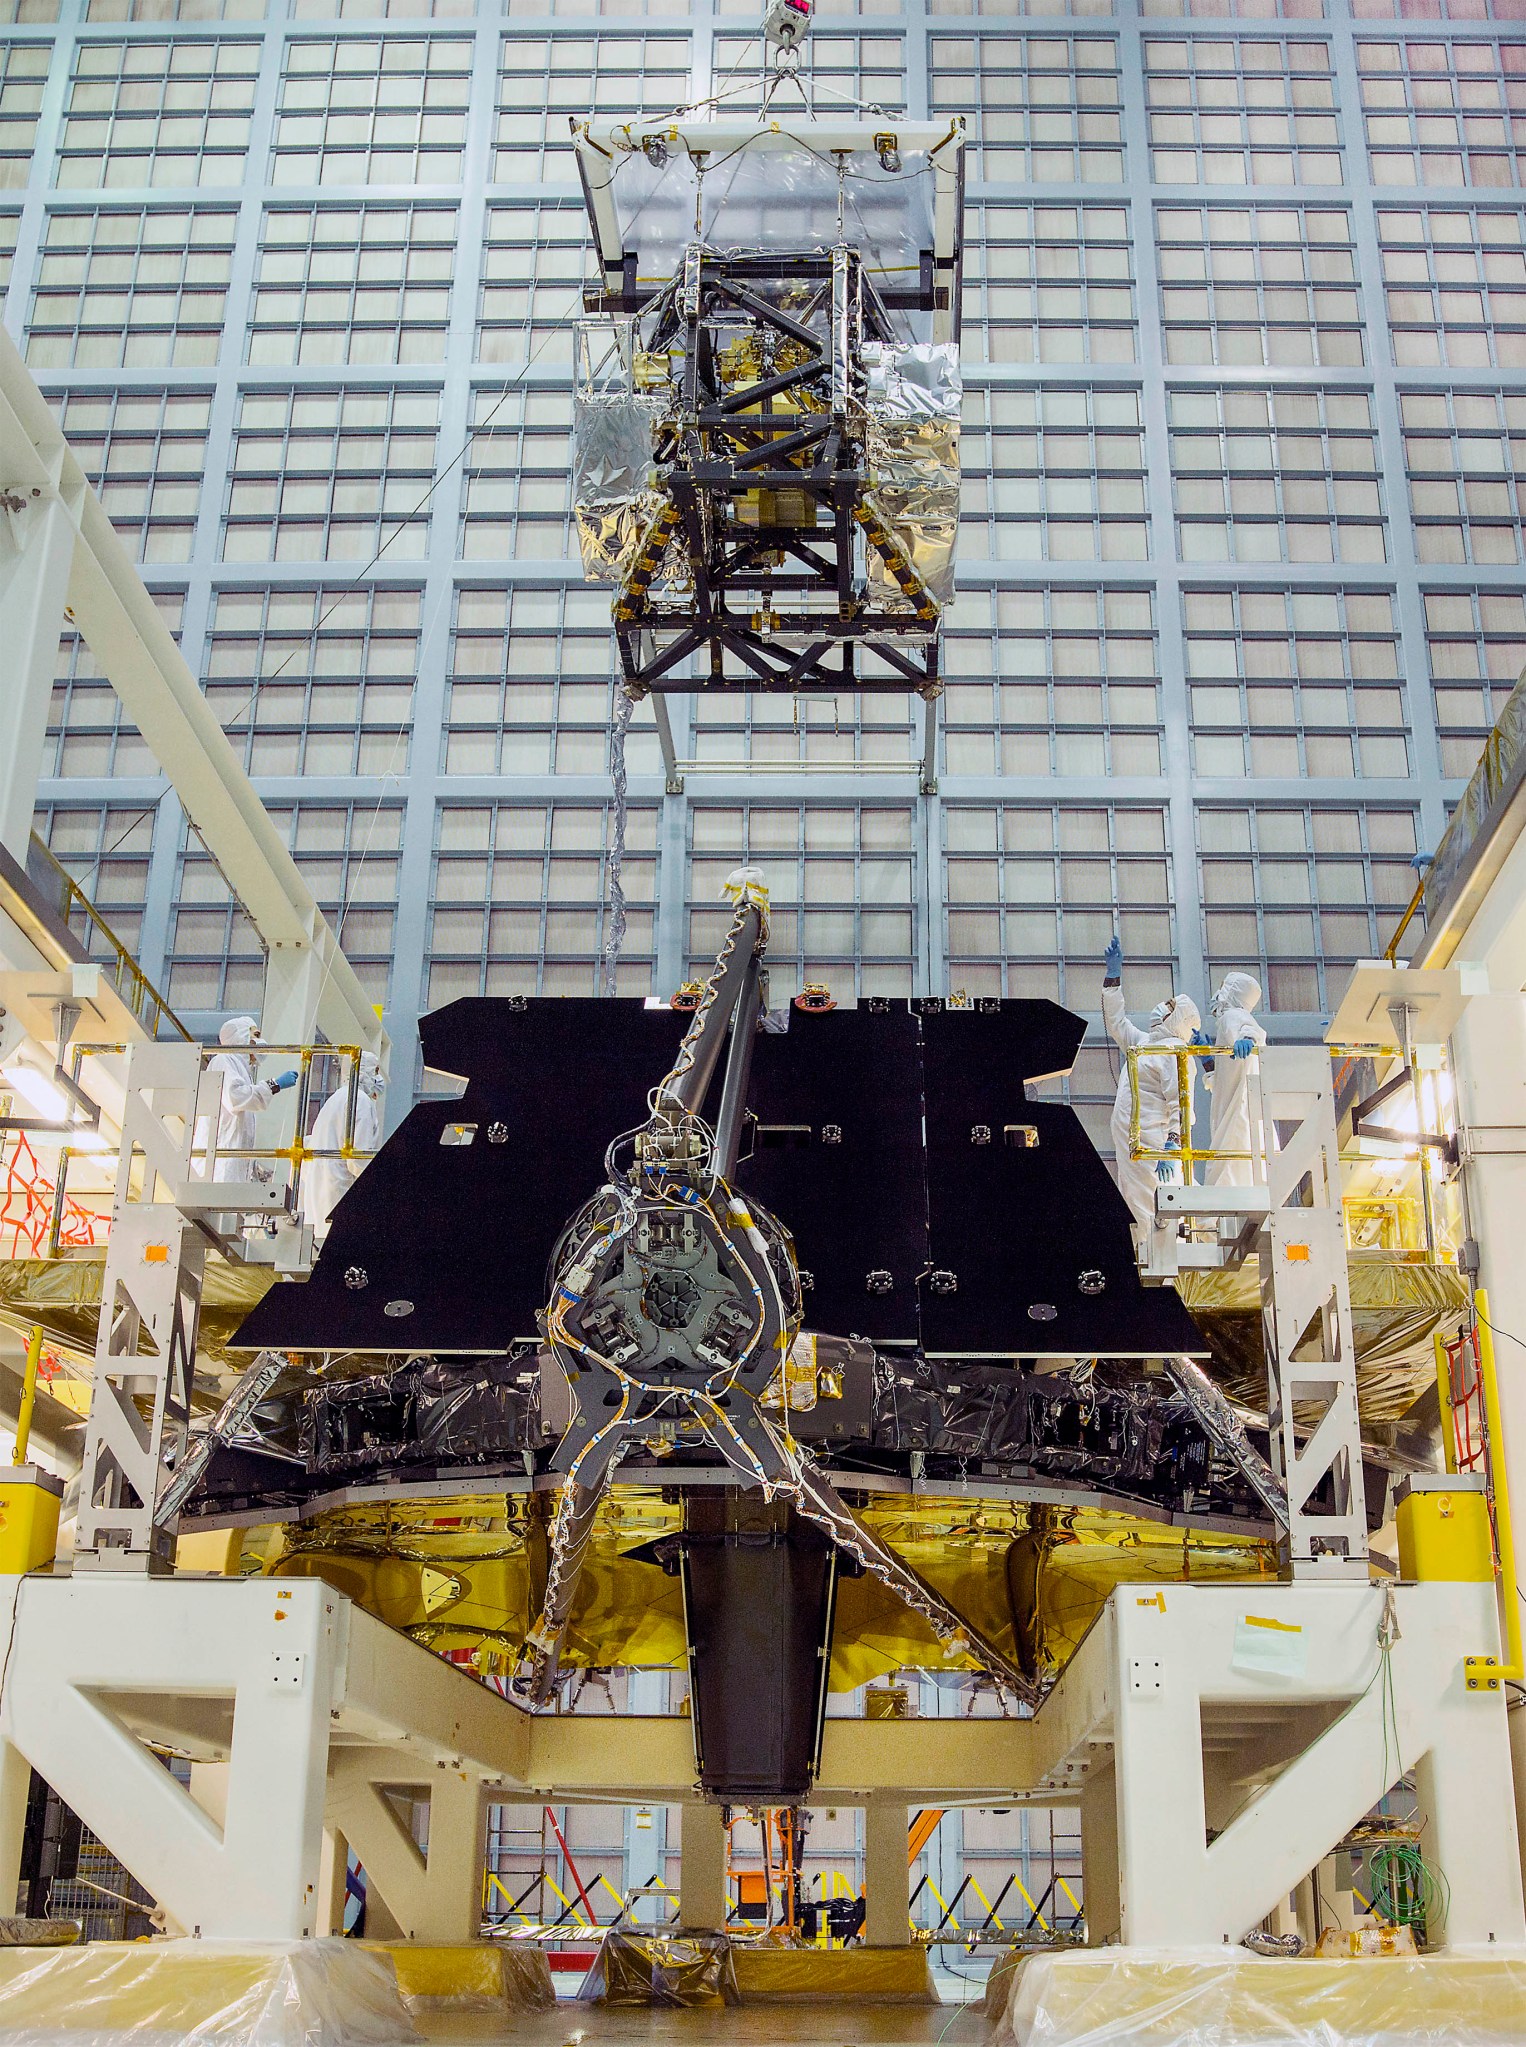 In this rare view, the James Webb Space Telescope team crane lifted the science instrument package for installation into the tel